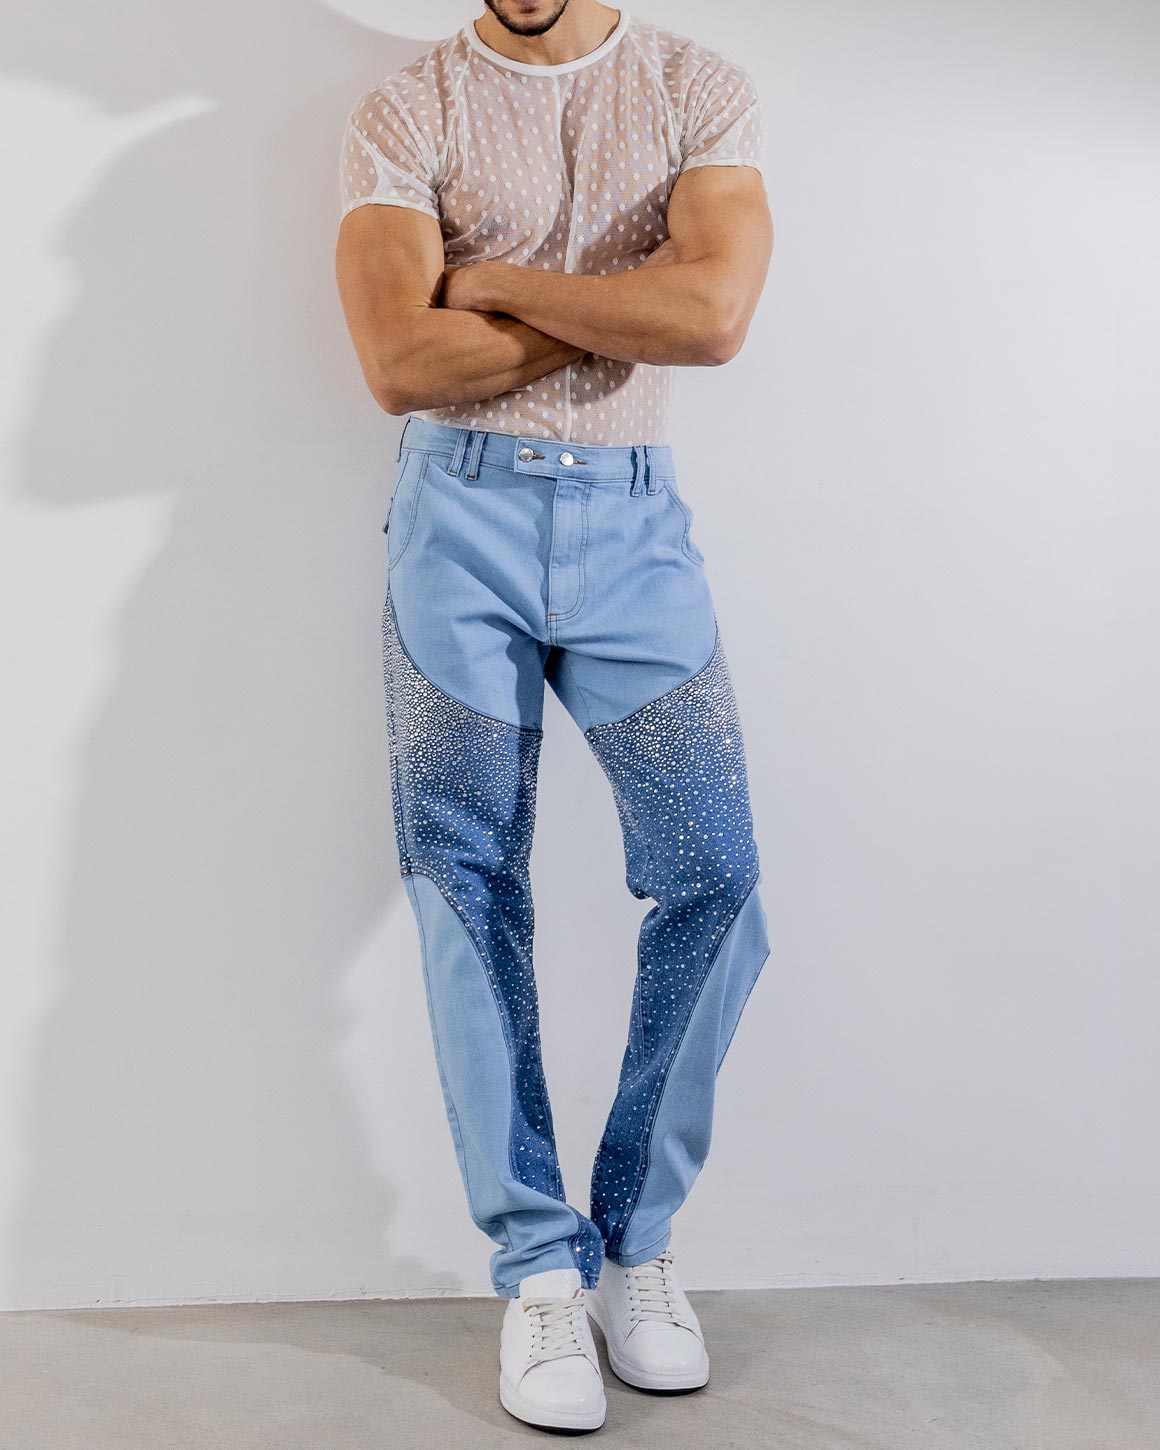 Exceed, Jeans, Handmade Bleach Dyed Louis Vuitton Print Jeans 26